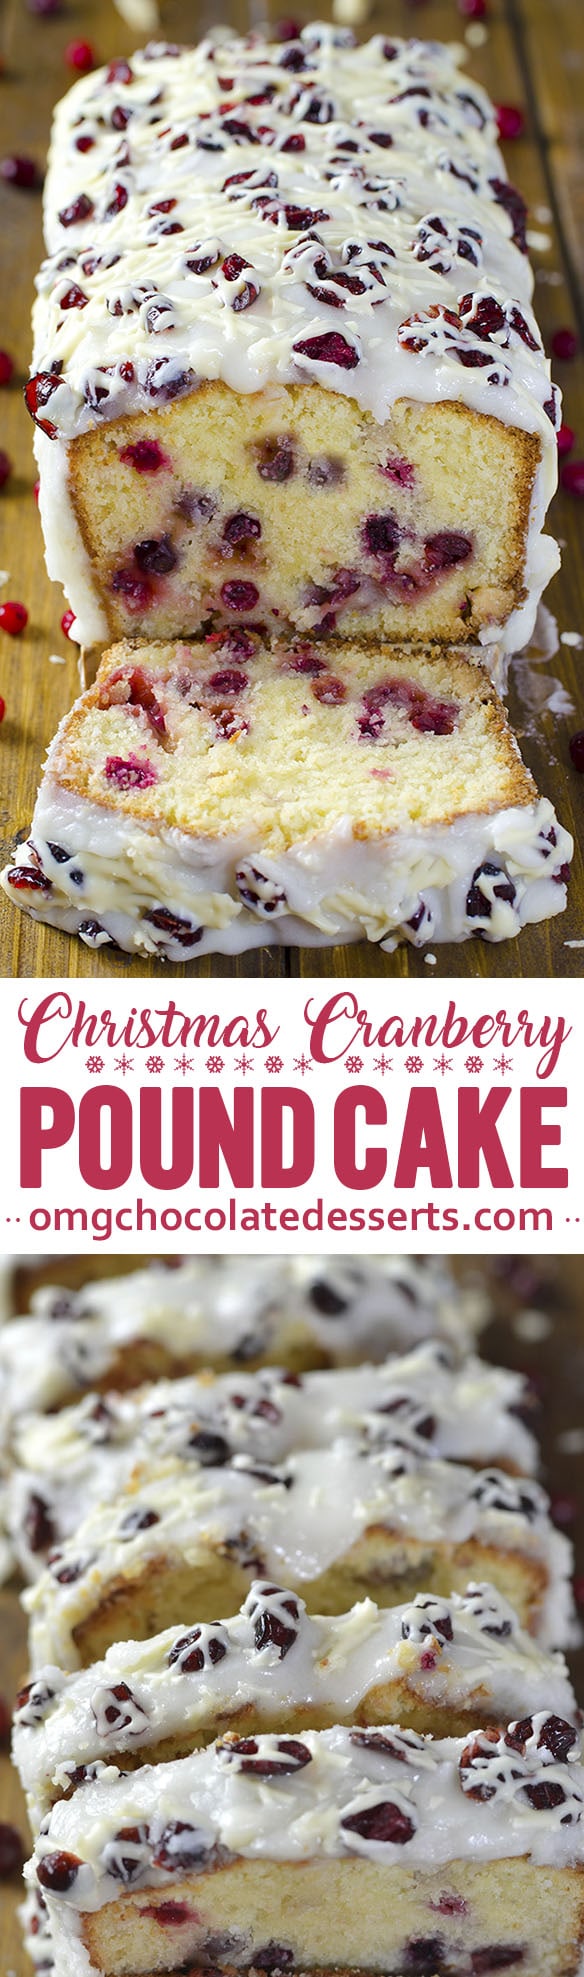 Cranberry Cream Cheese Pound Cake: This moist, delicious pound cake is studded with fresh cranberries. Perfect for Christmas!